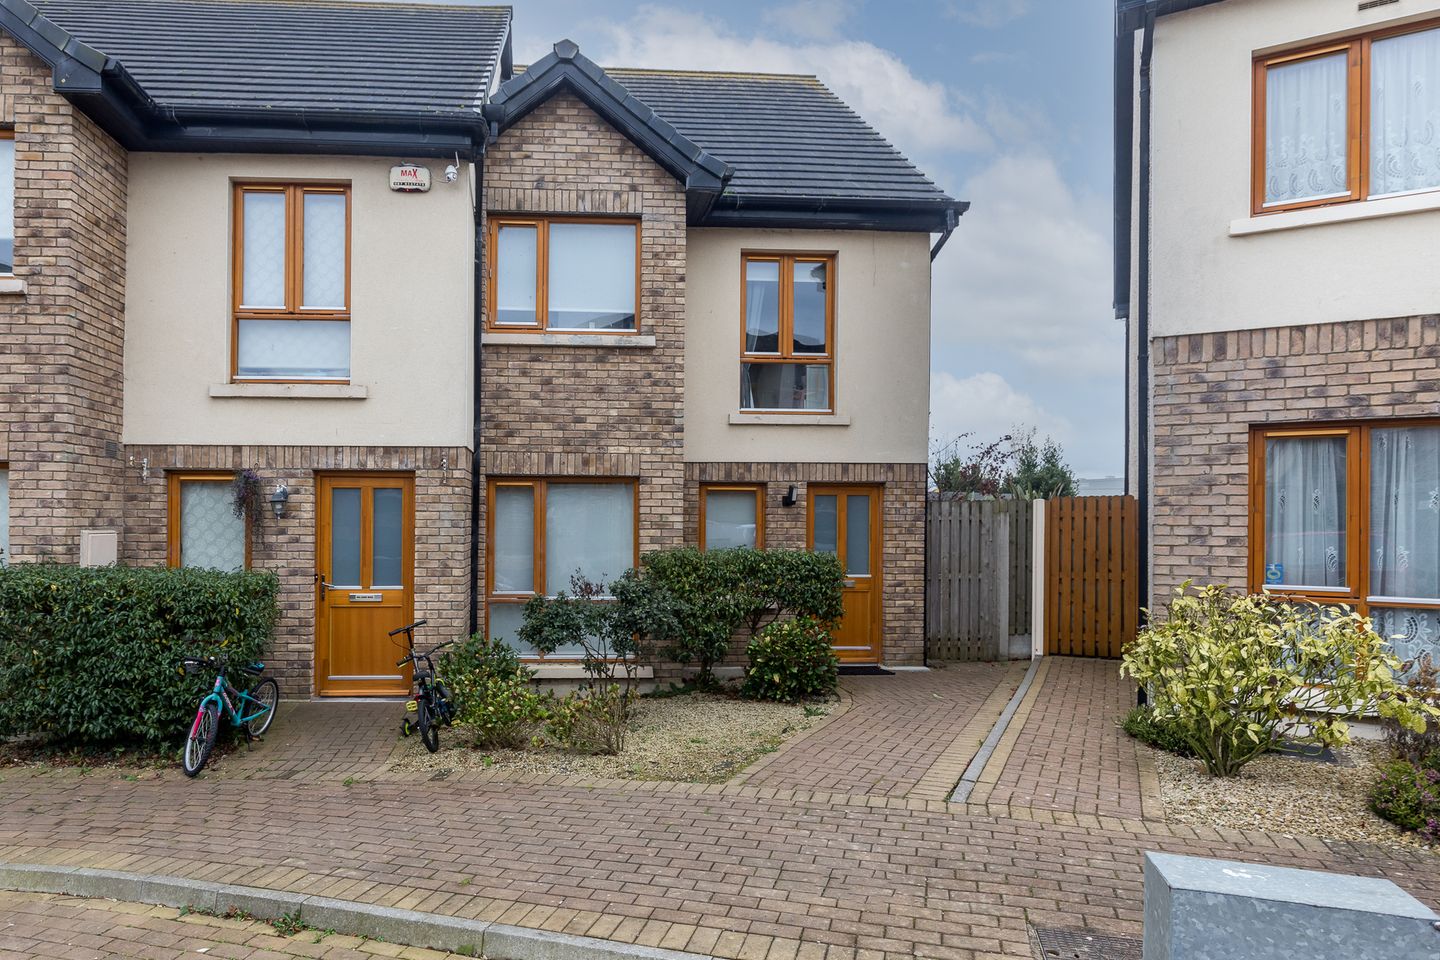 46 Millbourne Crescent, Ashbourne, Co. Meath, A84X268